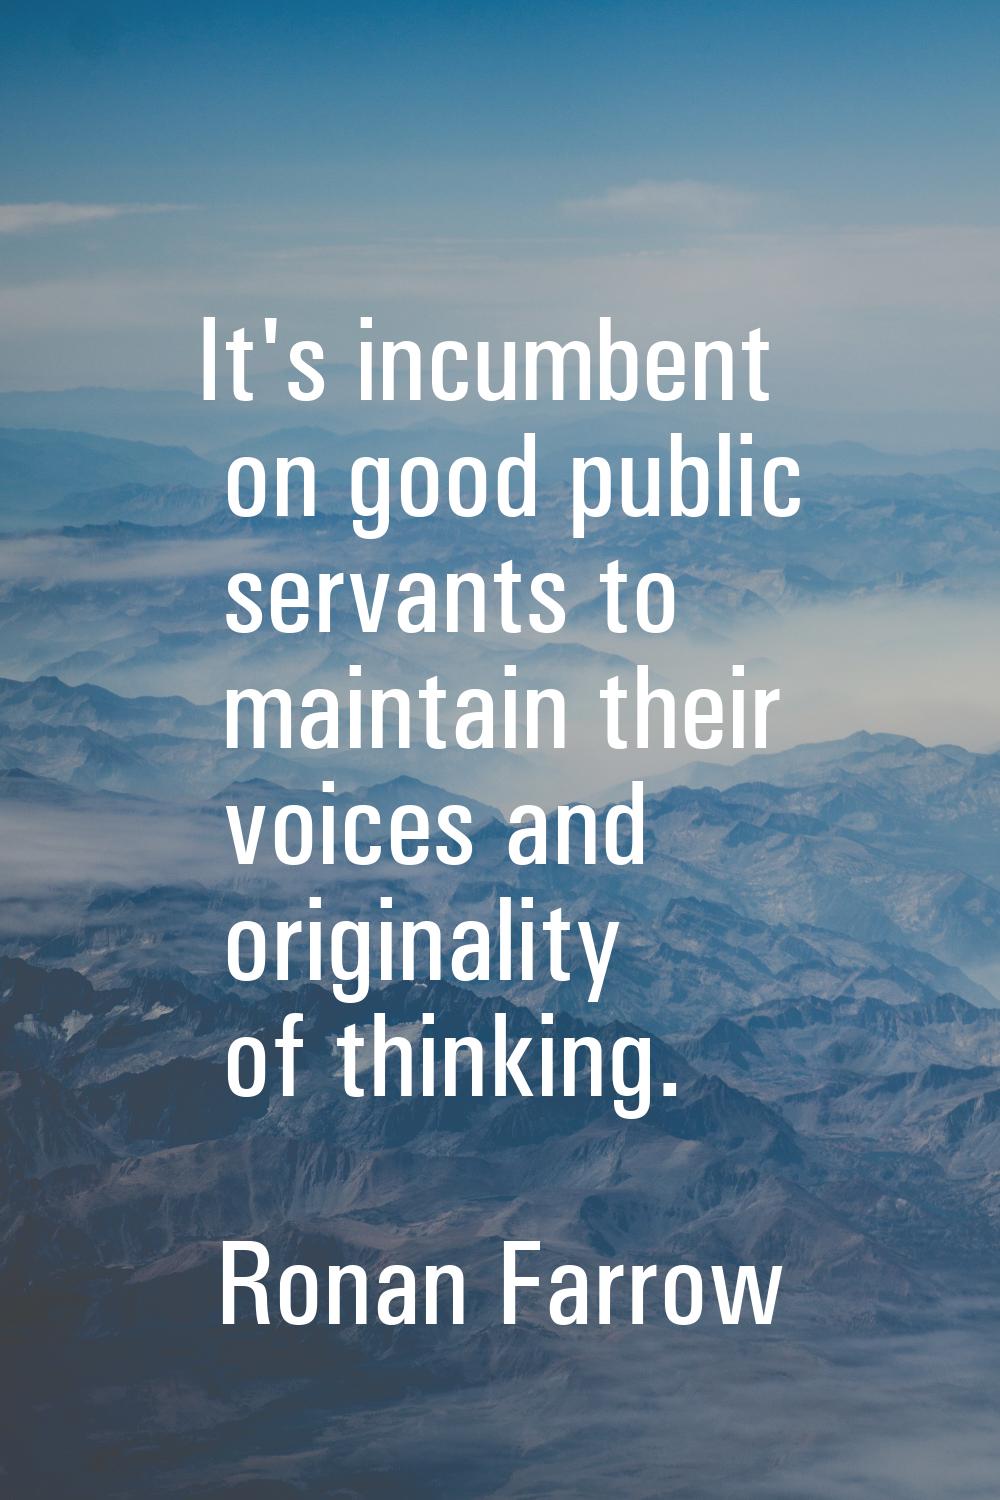 It's incumbent on good public servants to maintain their voices and originality of thinking.